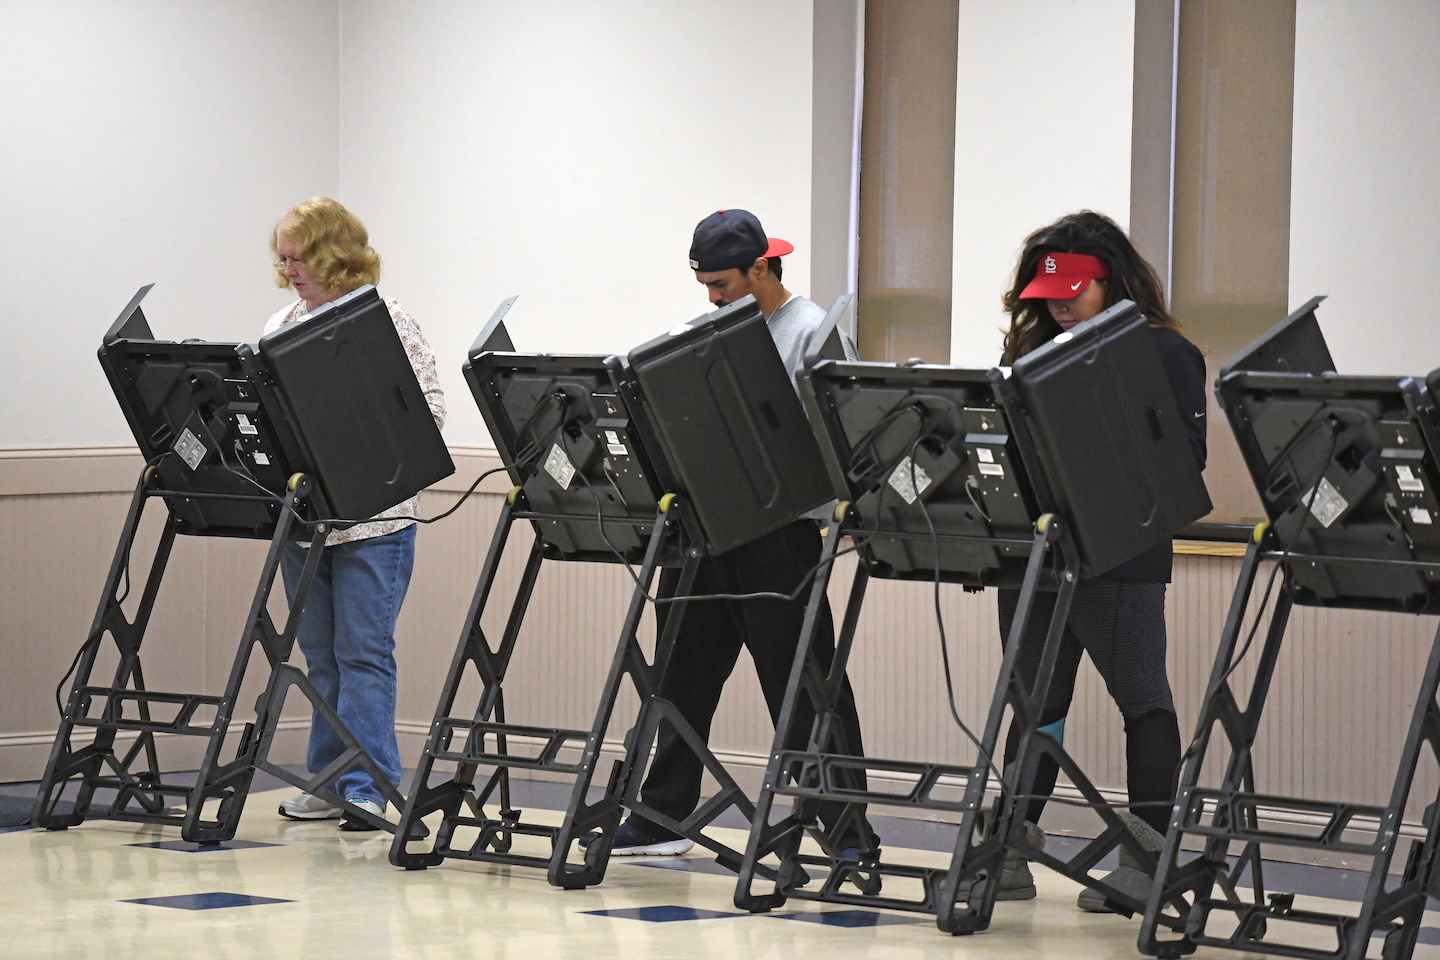 How Secure Are U.S. Electronic Voting Systems?